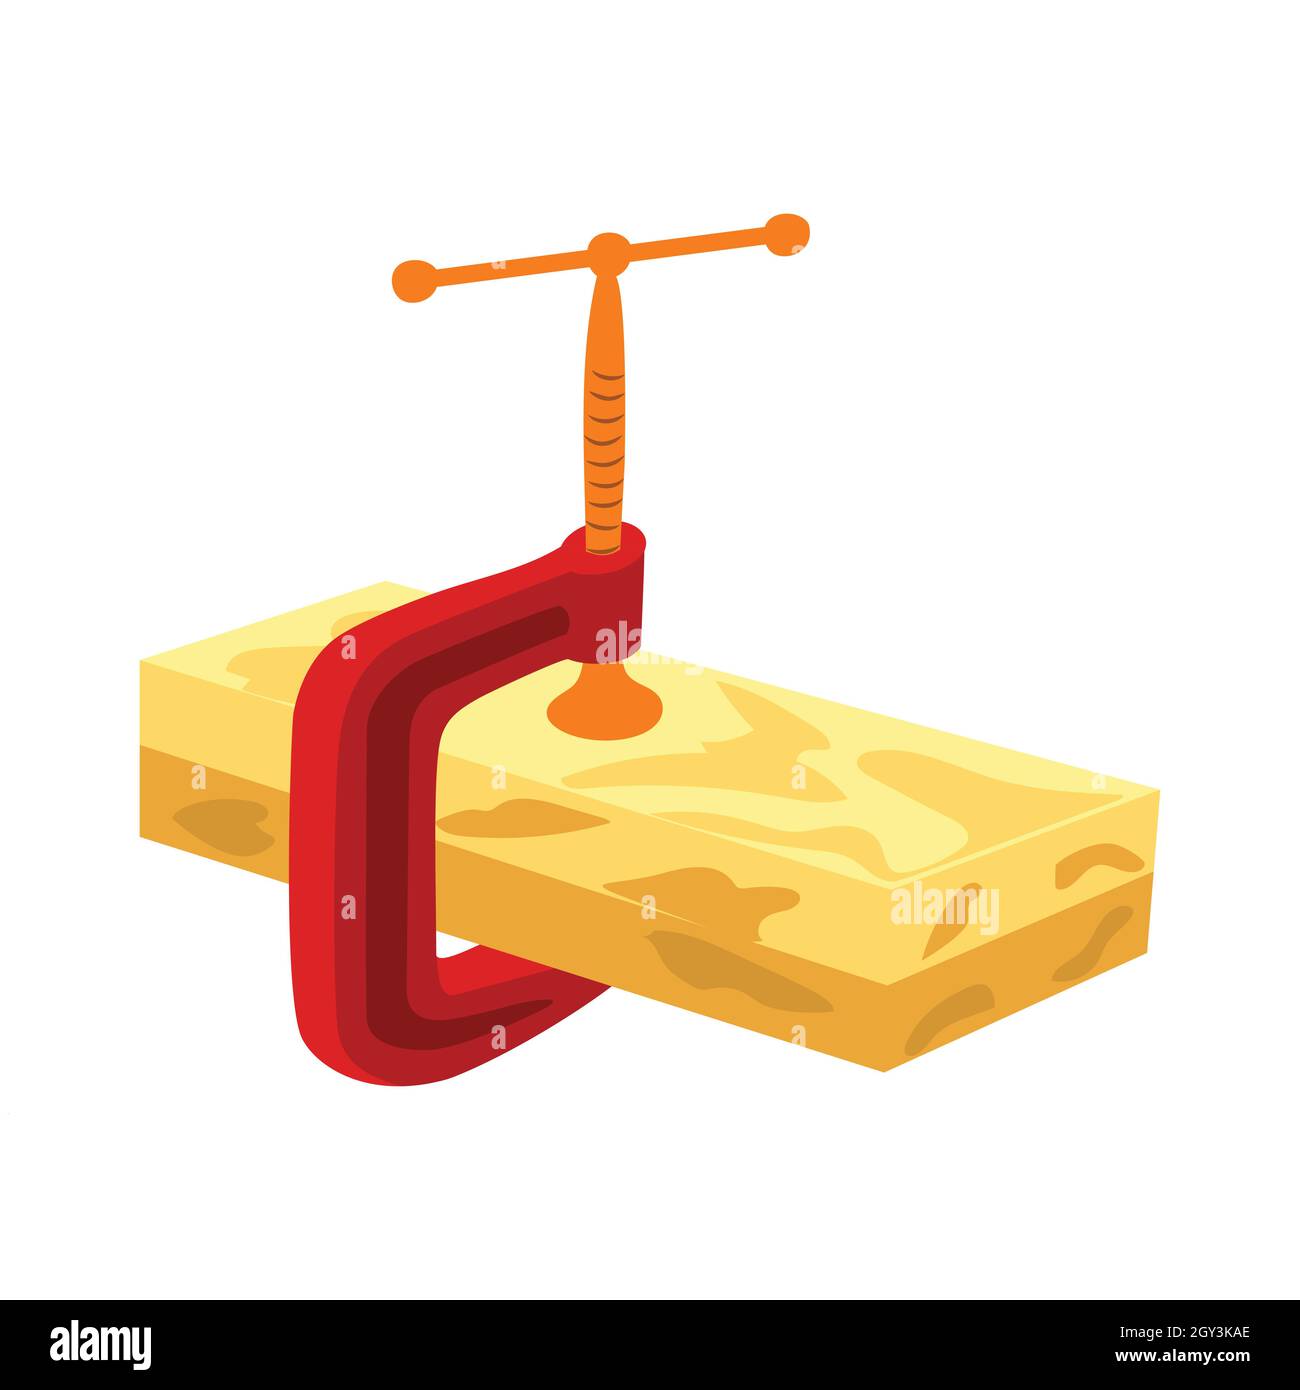 The red clamp is usually used to maintain the position of the work object during the gluing process, maintain measurements, hold objects to be joined Stock Vector